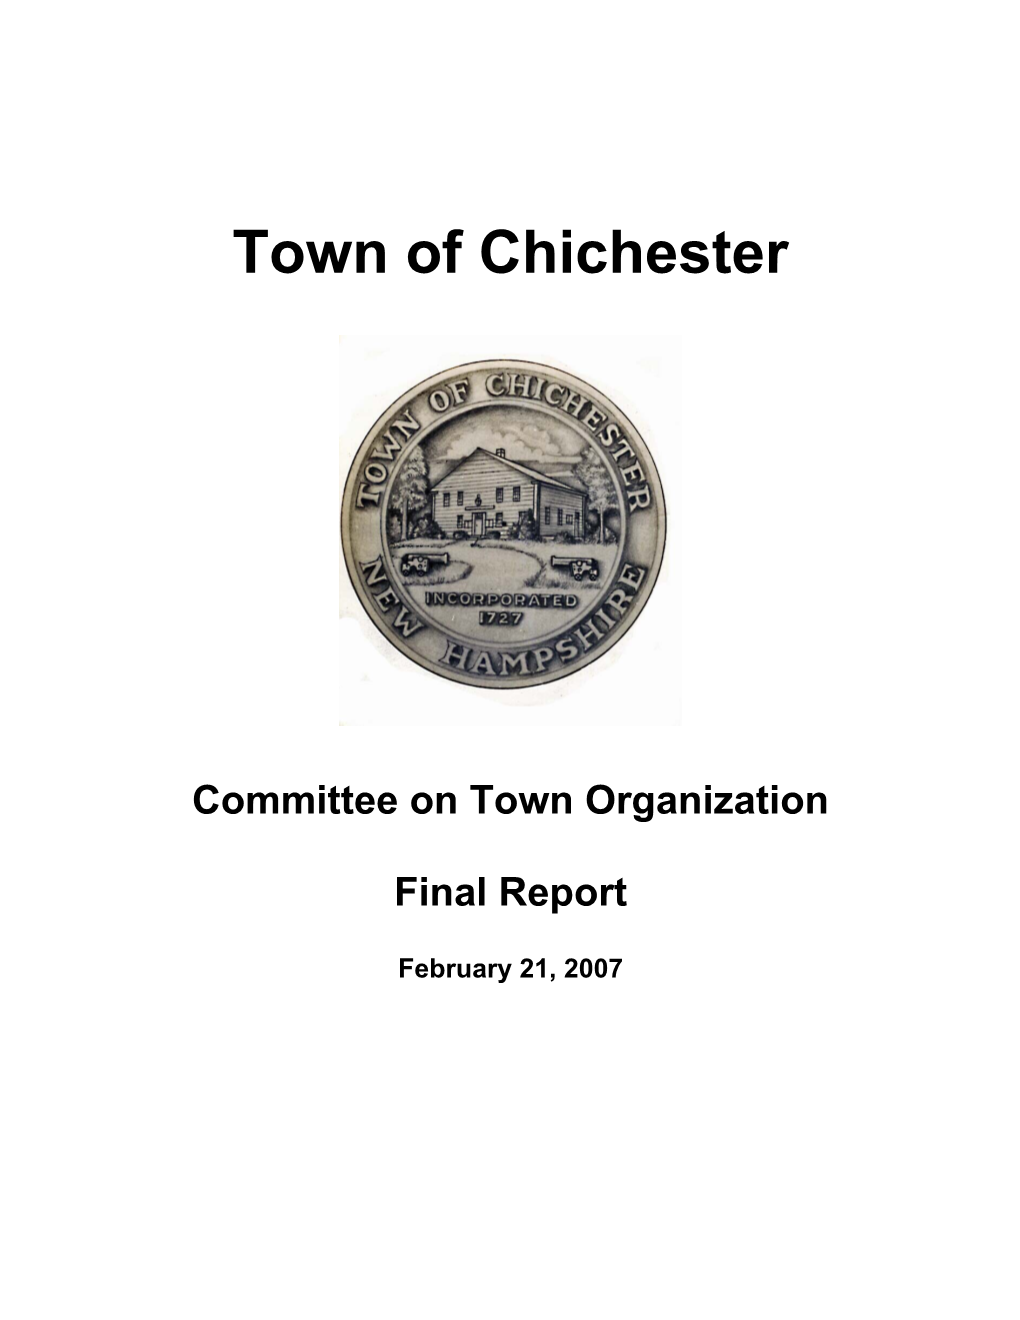 Chichester Committee on Town Organization